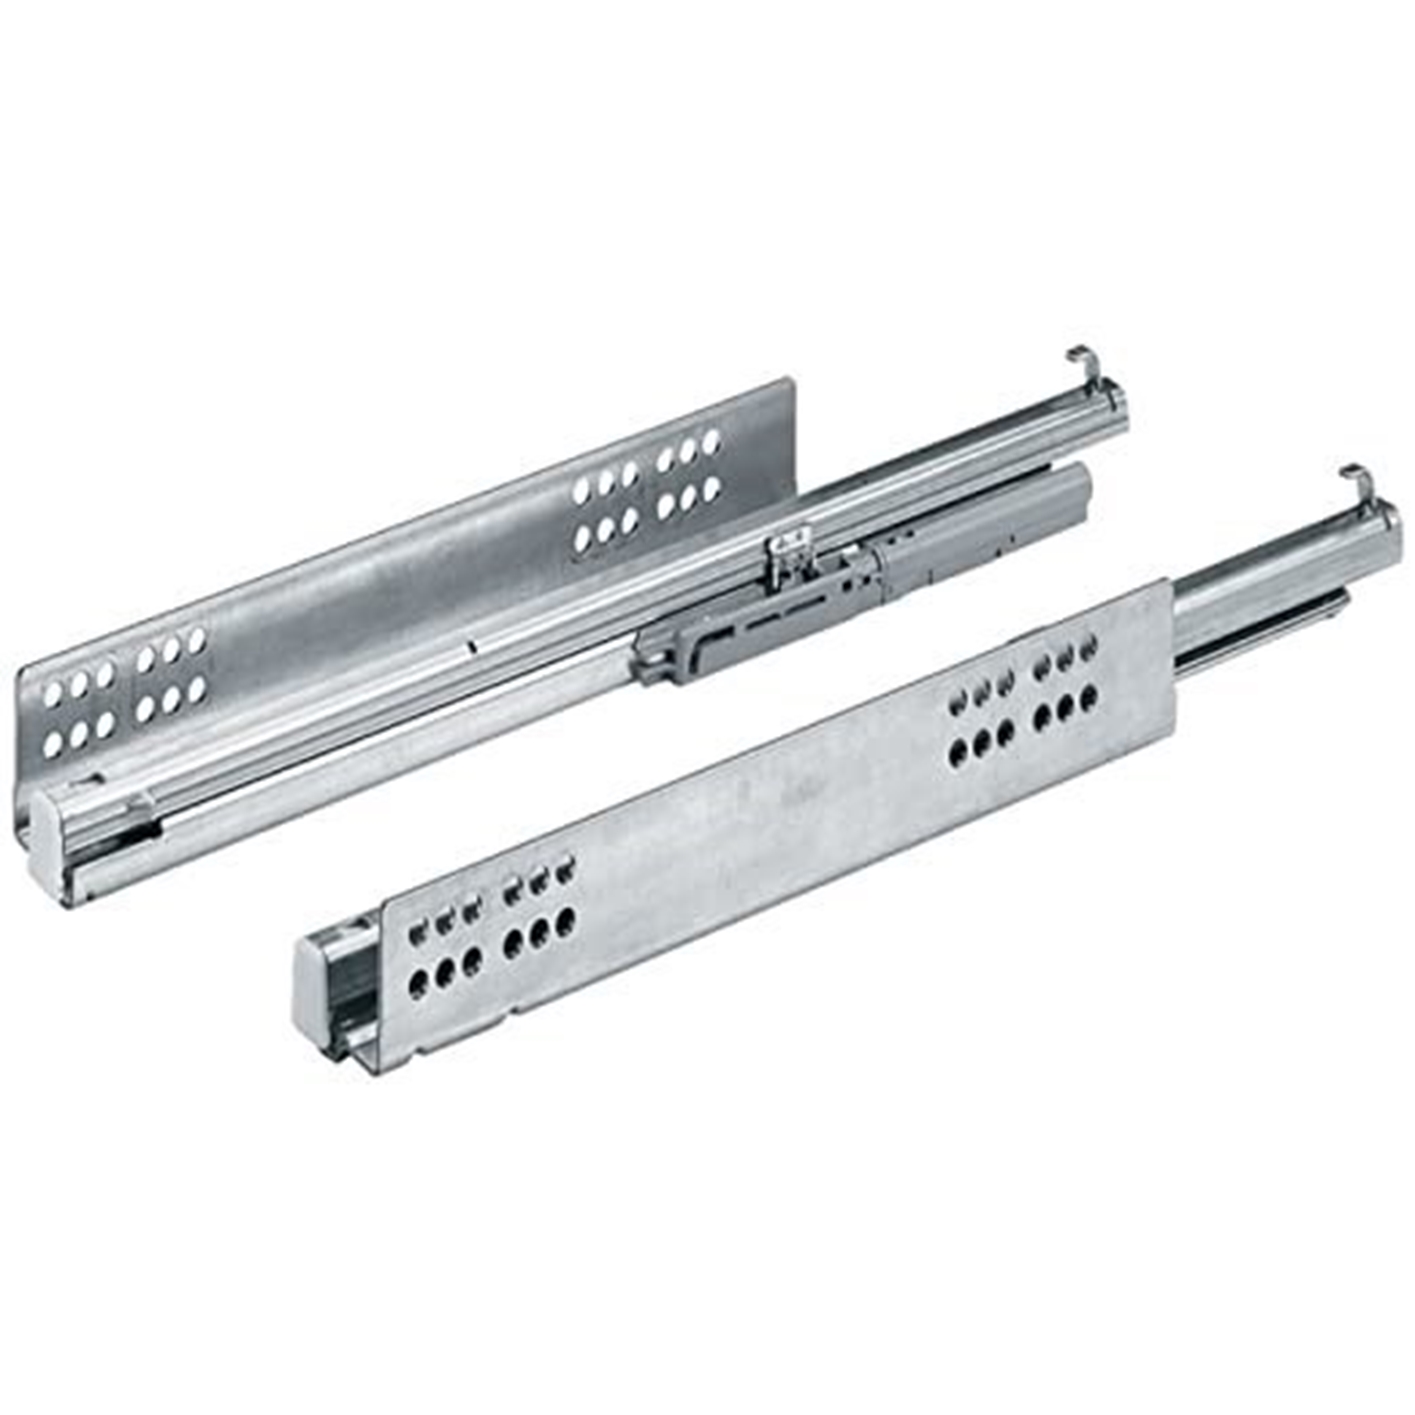 Ray âm giảm chấn ACTRO 5D 300mm Hettich AT300-4F